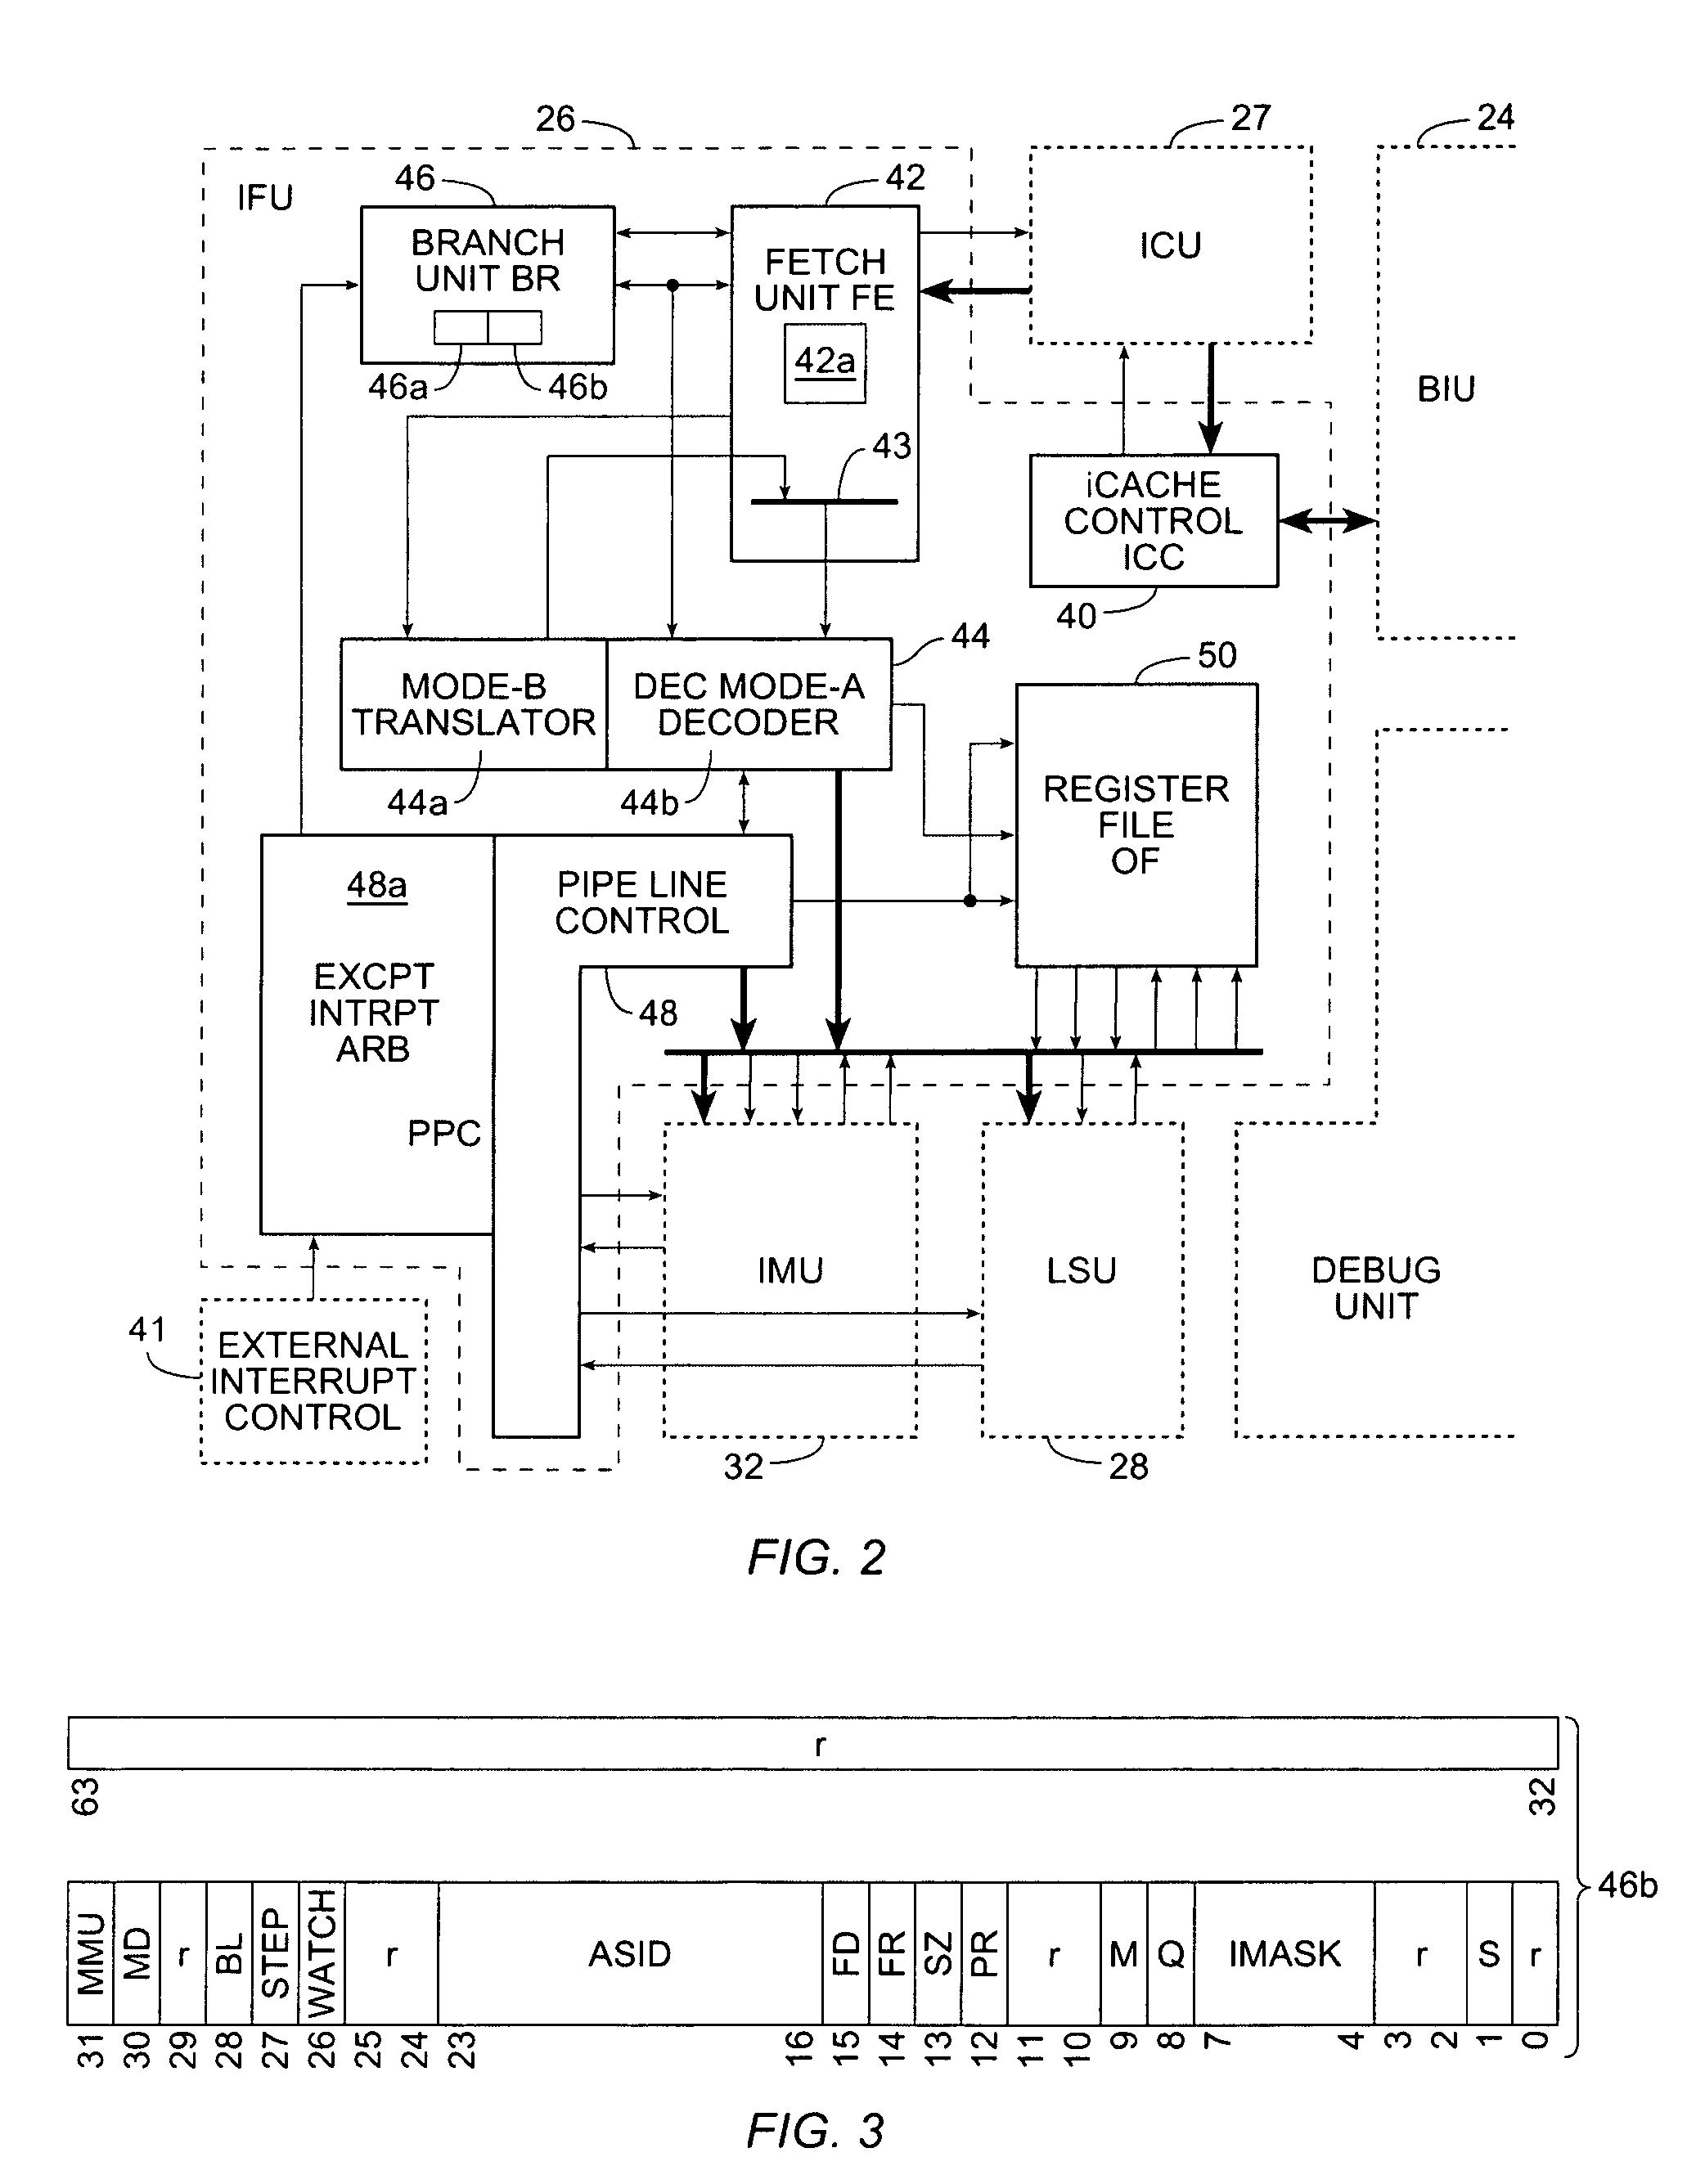 Processor architecture for executing two different fixed-length instruction sets